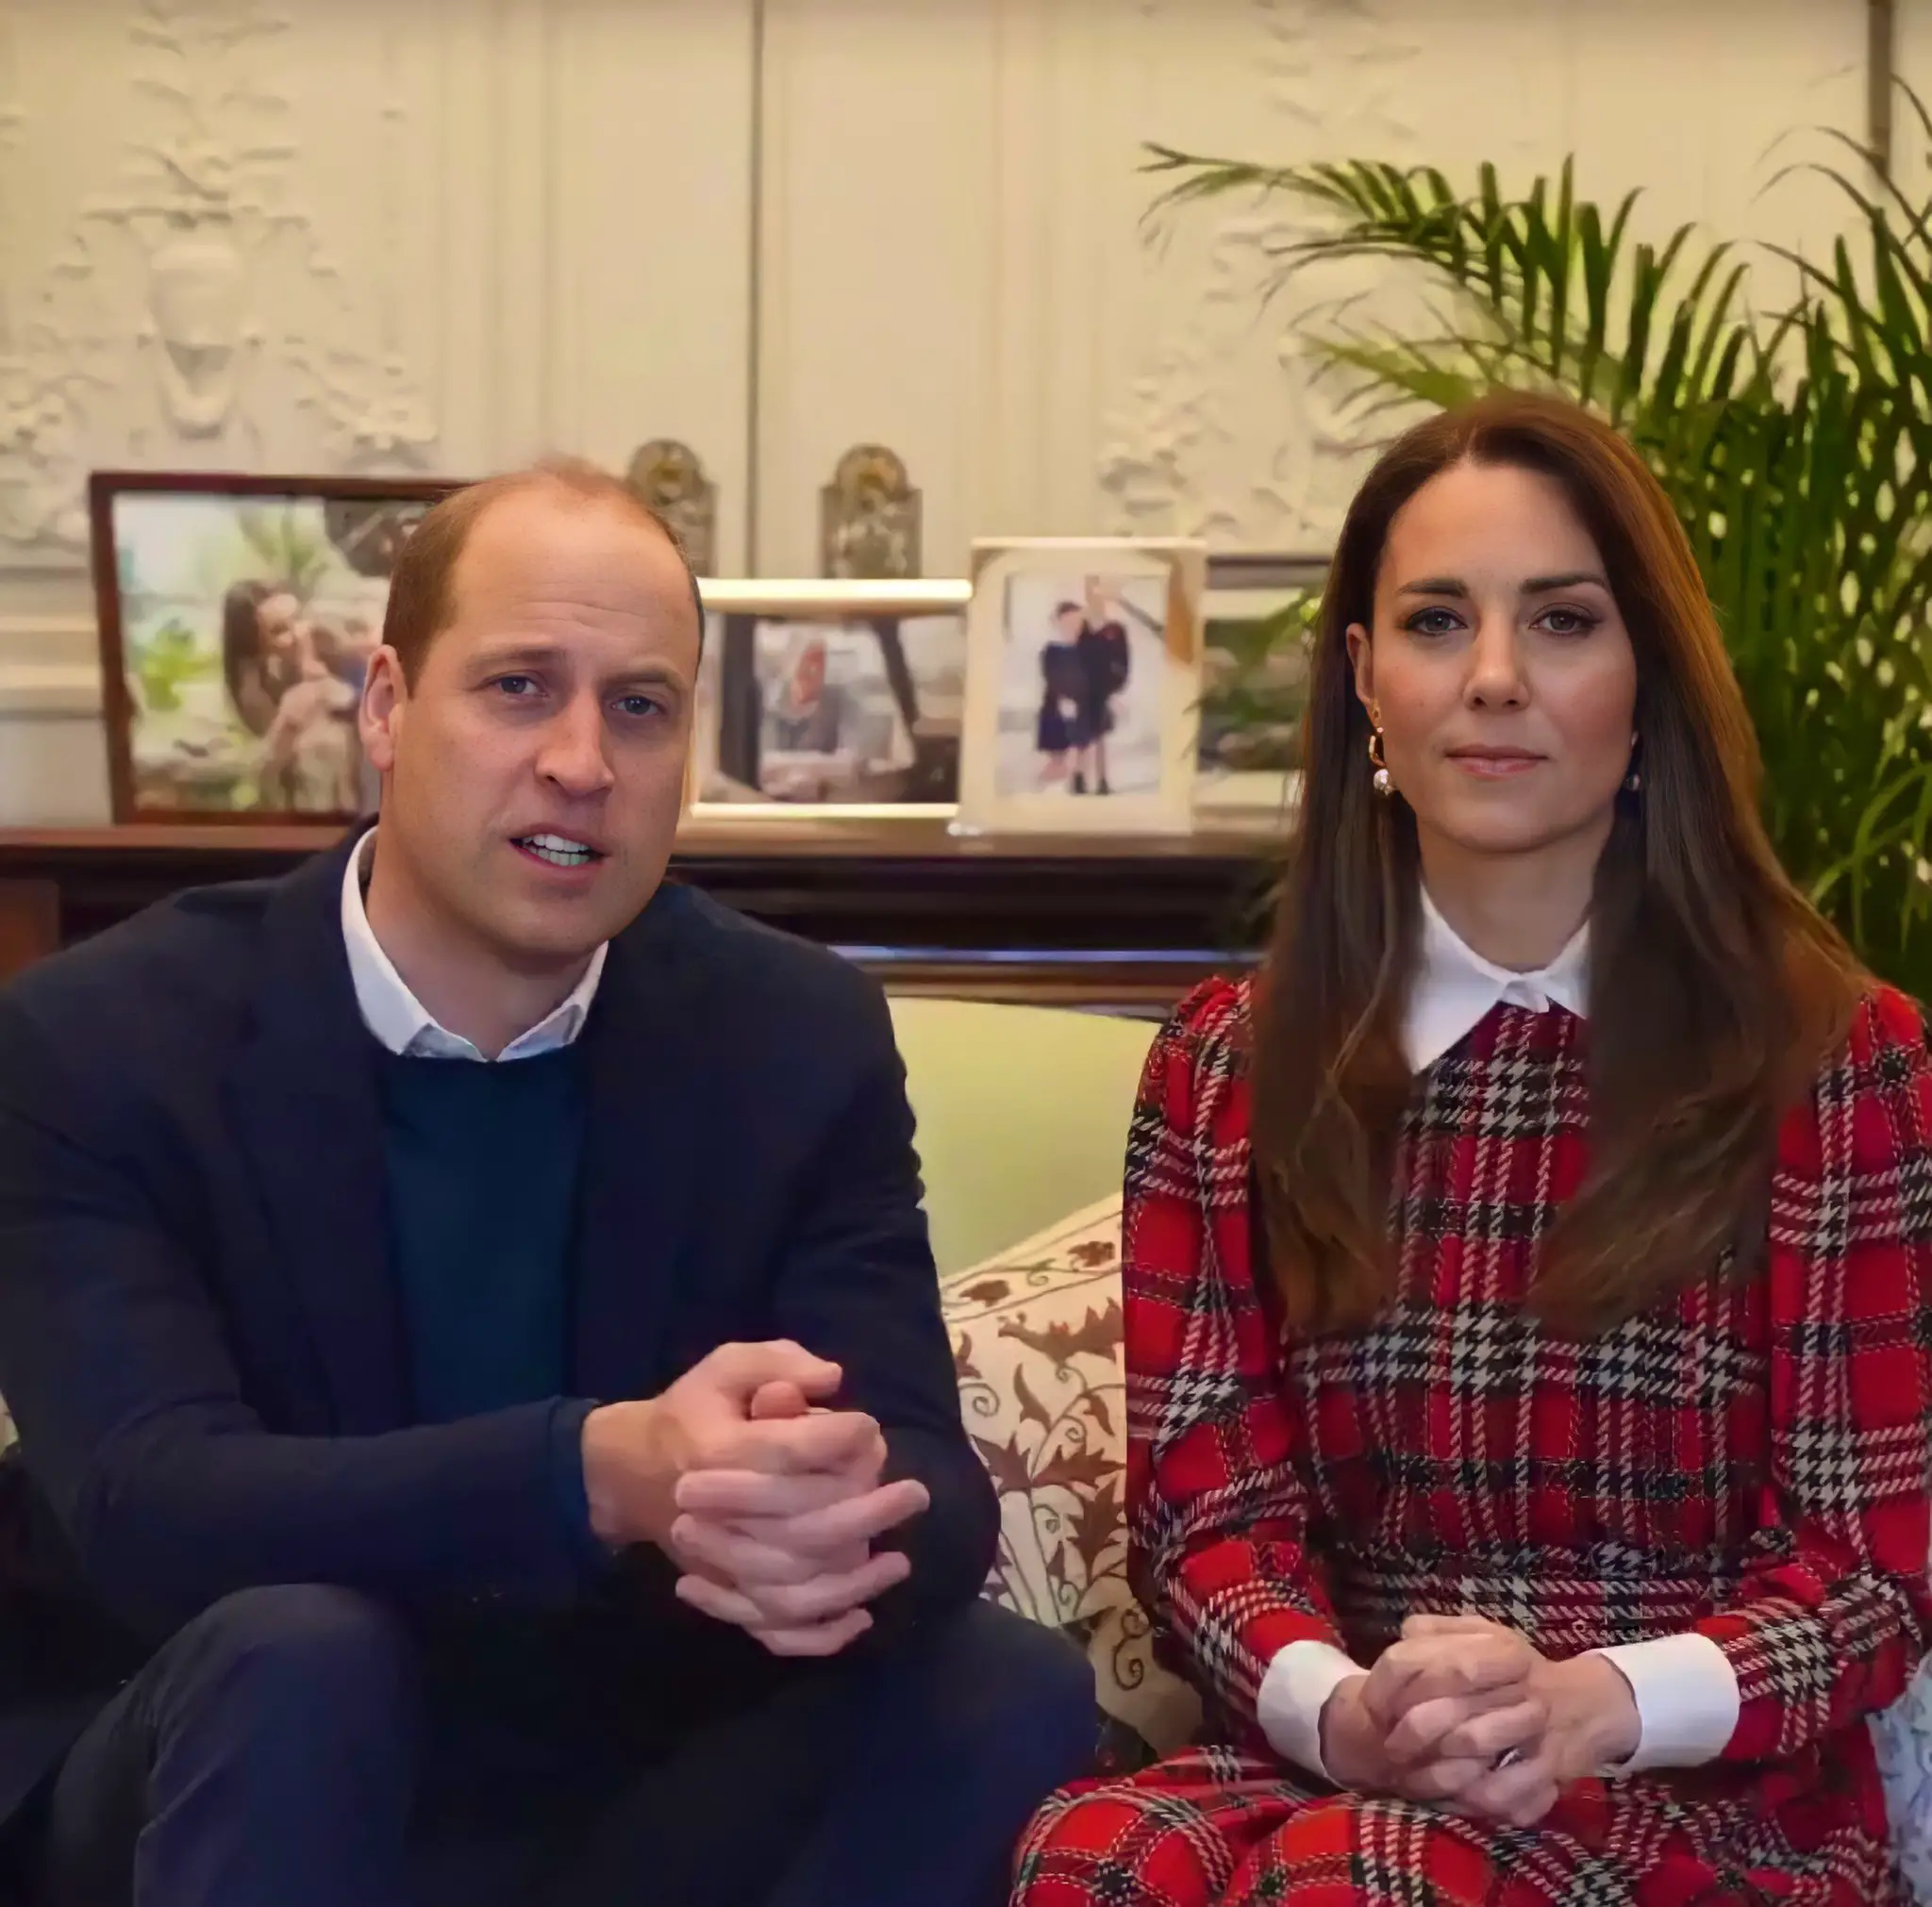 The Duke and Duchess of Cambridge marked Burns Night with a video message to NHS frontline workers